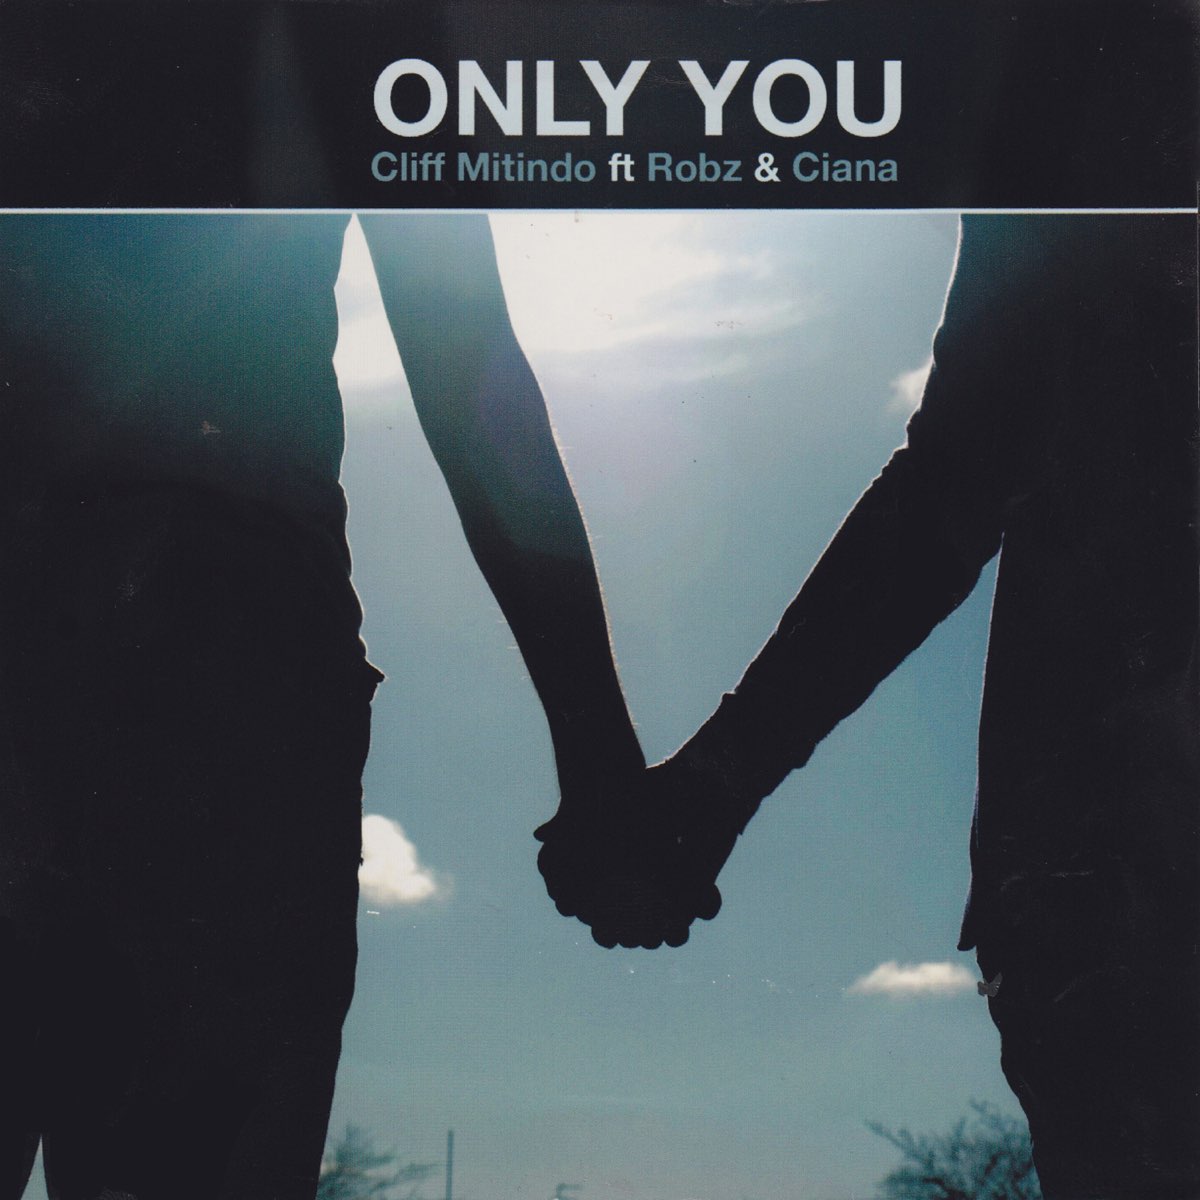 Without you only you. Only you. Only you картинки. Only you only you. Надпись only you.